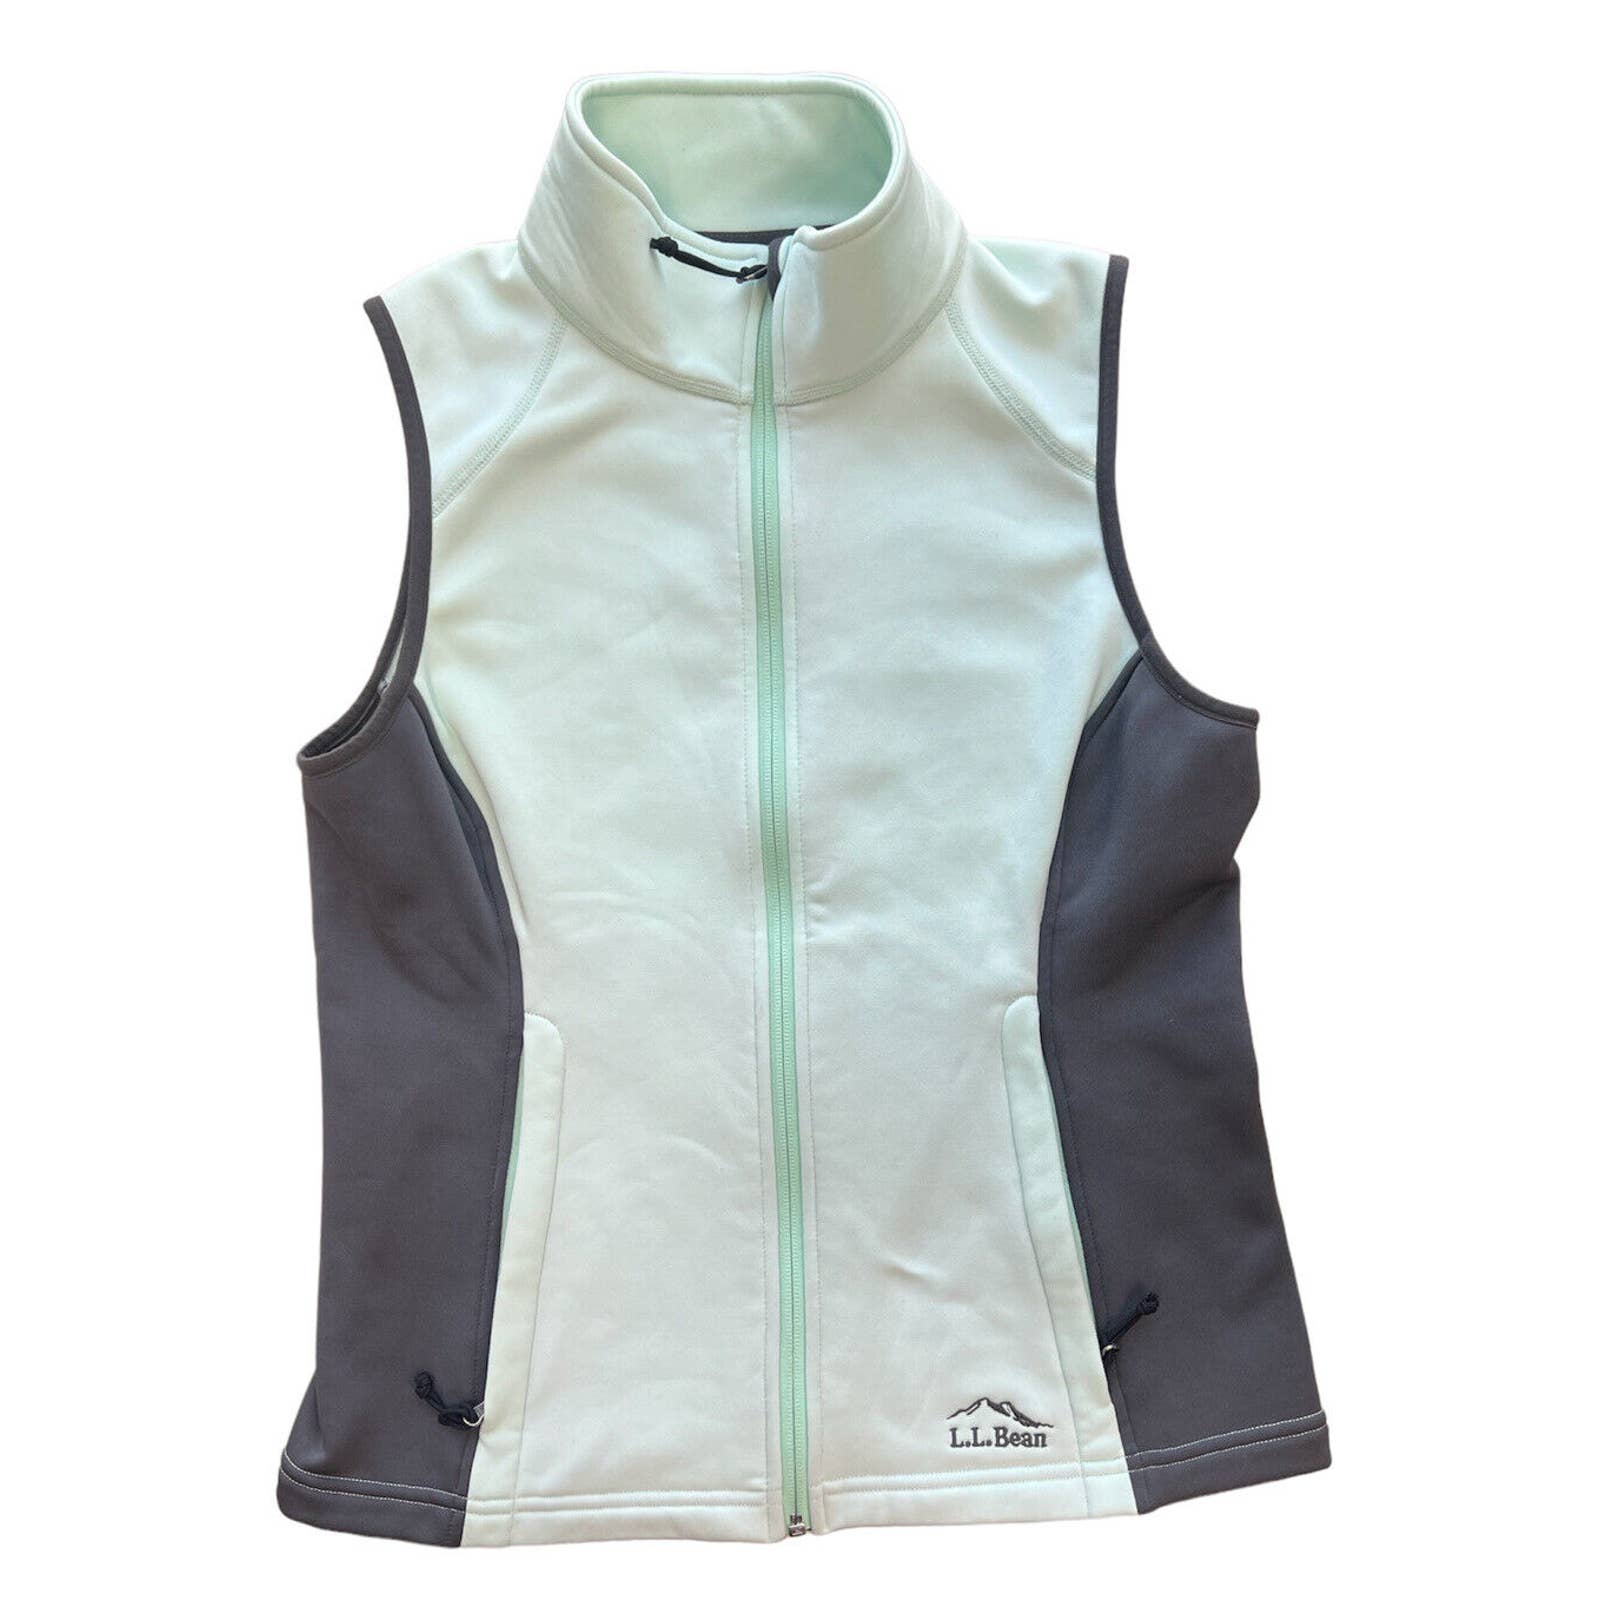 LL Bean Vest Women’s Small Petite Teal And Gray Full Zip Polyester Stretch